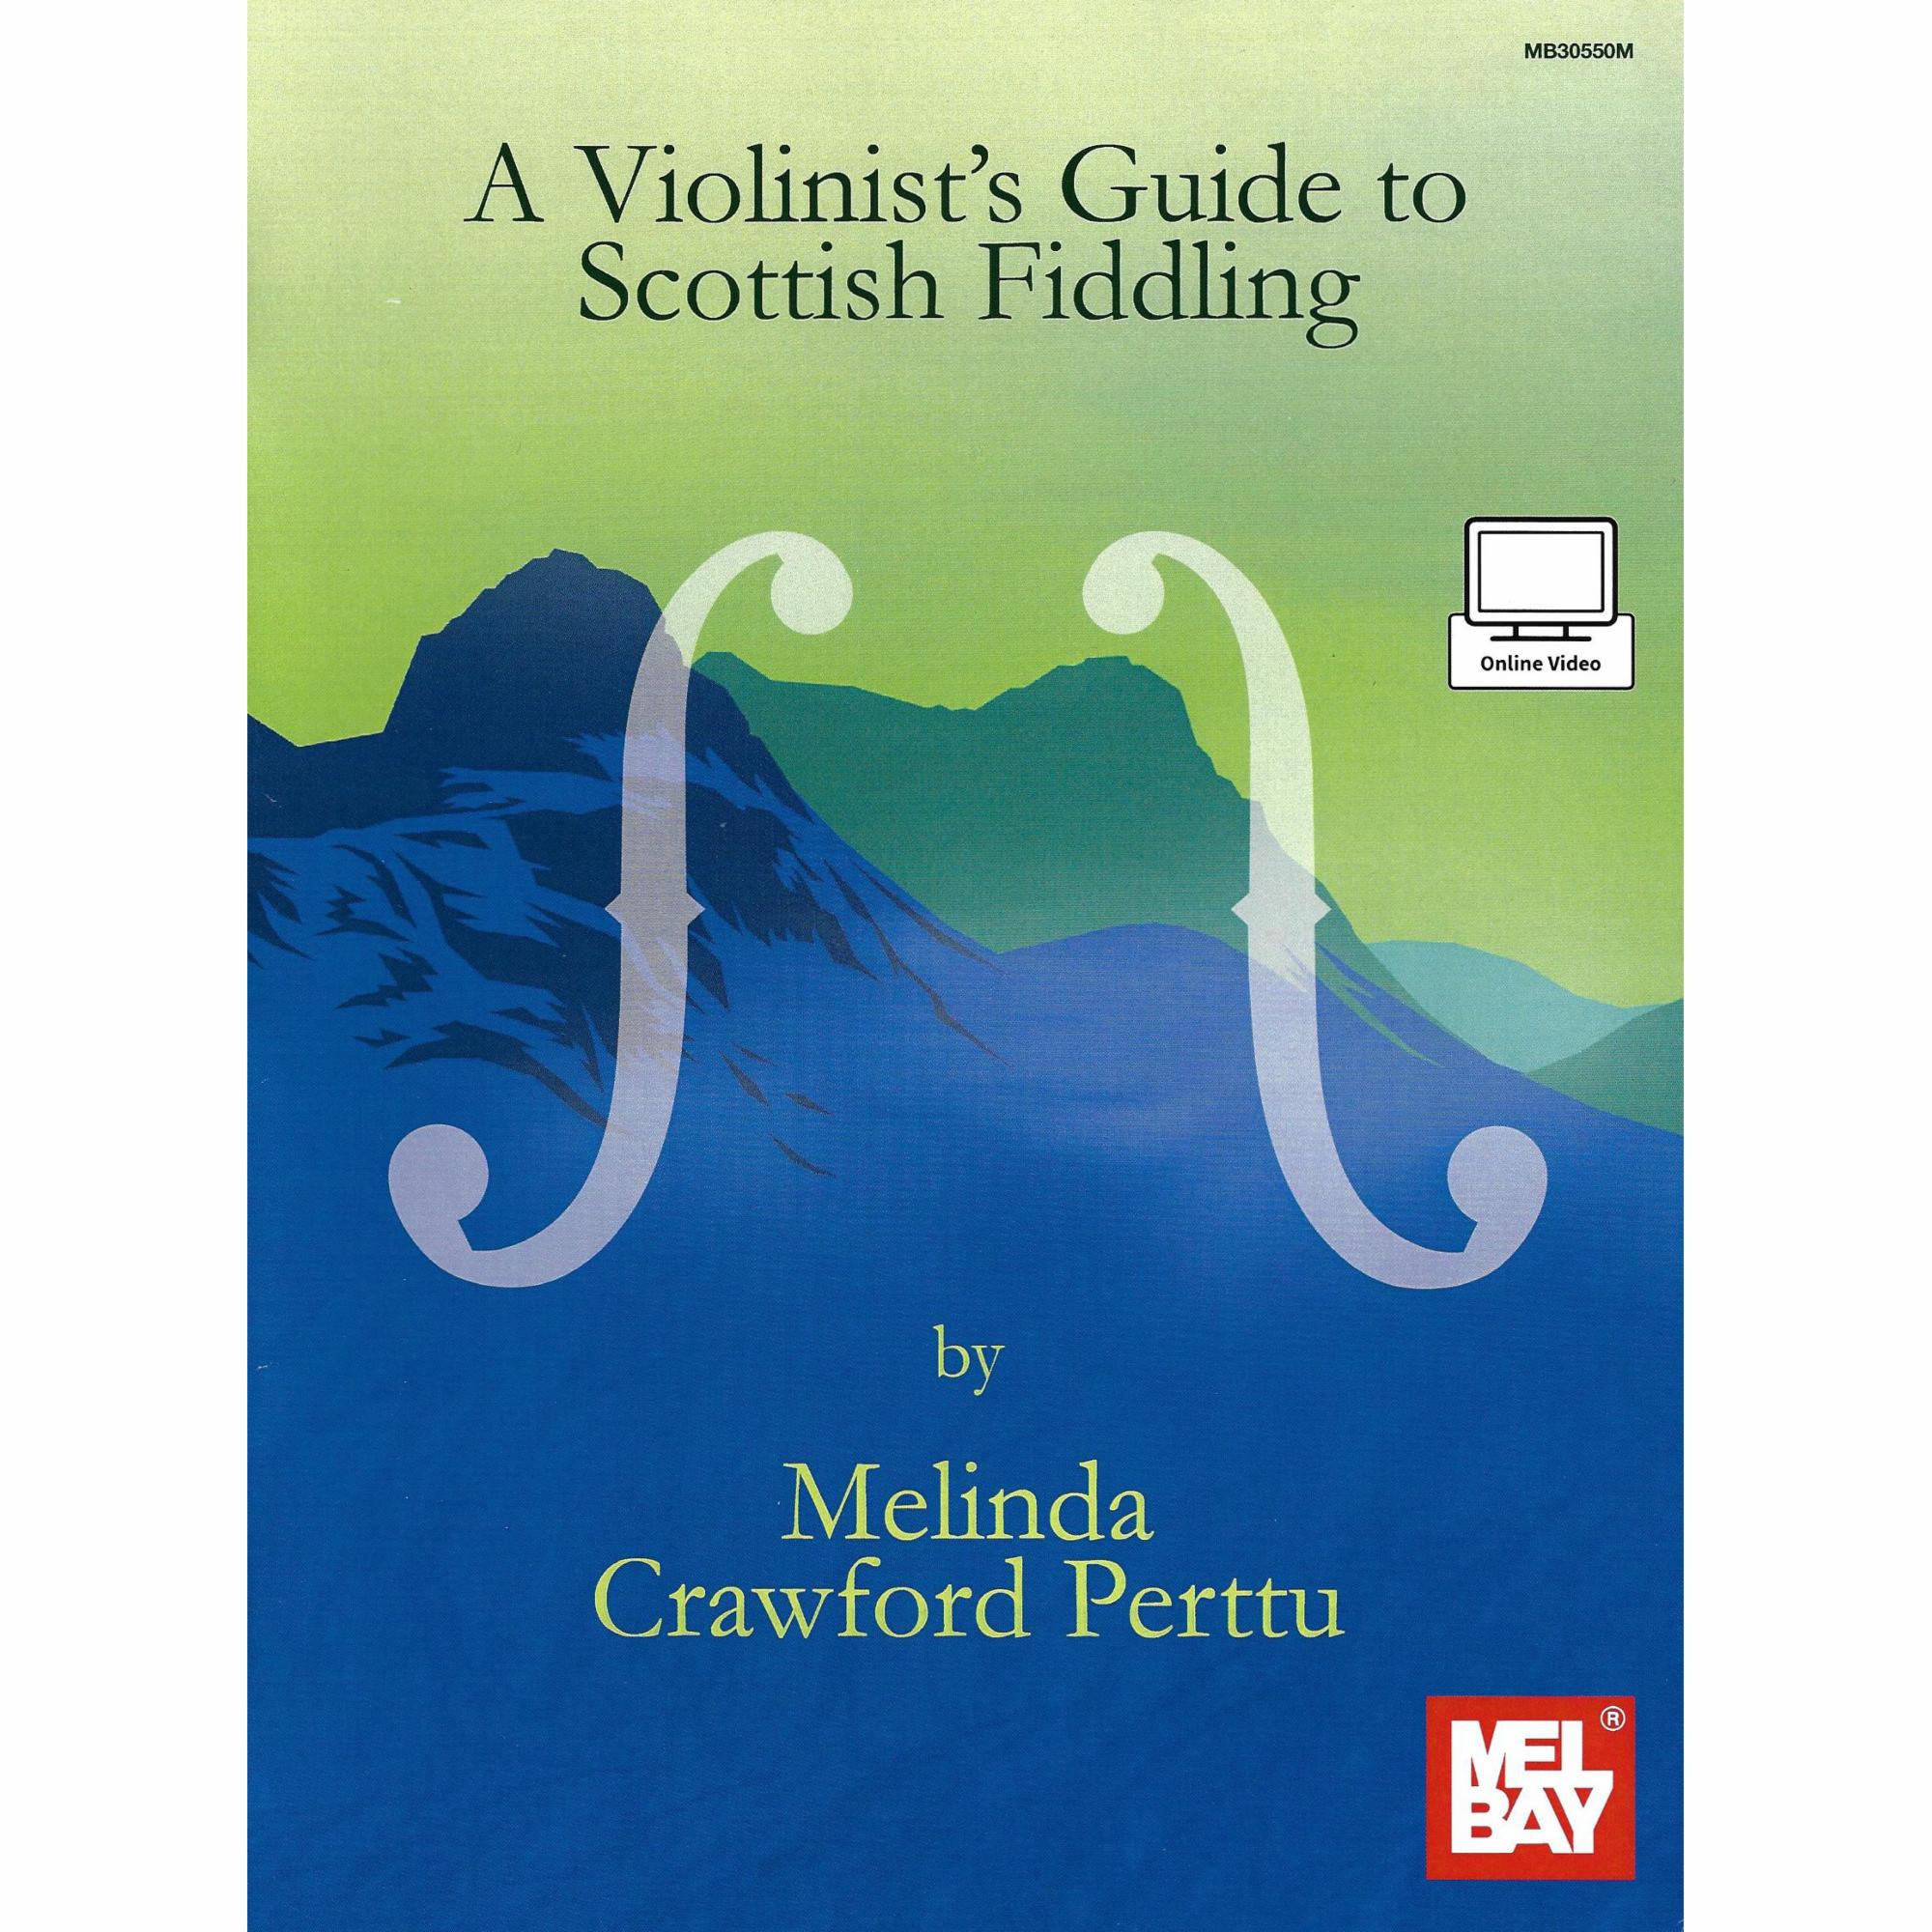 A Violinist's Guide to Scottish Fiddling